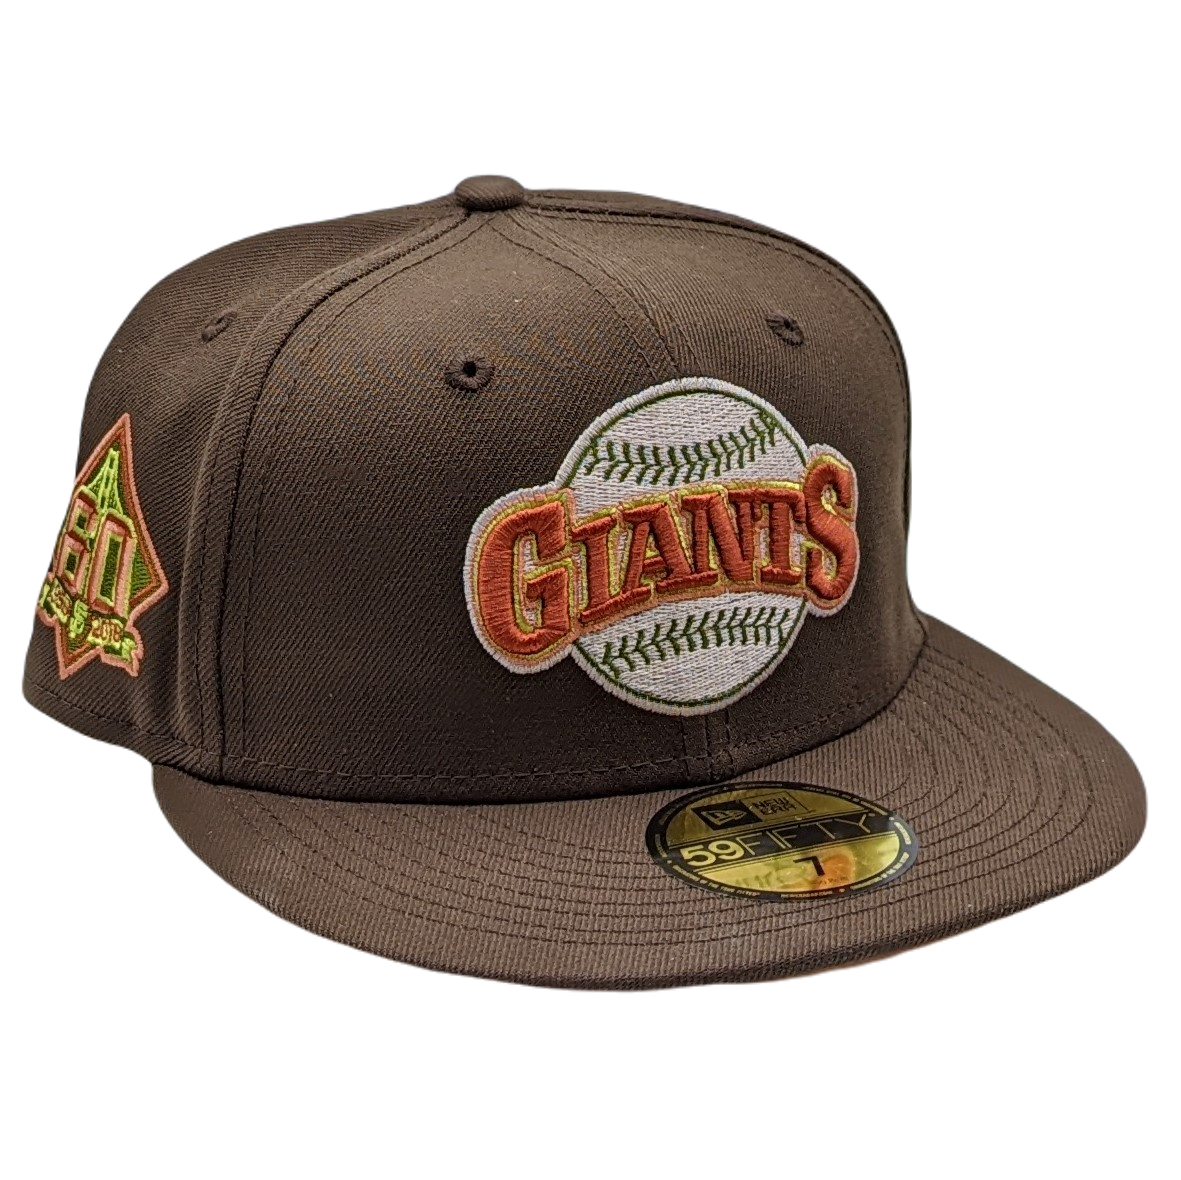 San Francisco Giants Fitted New Era 7 1/4 Hat